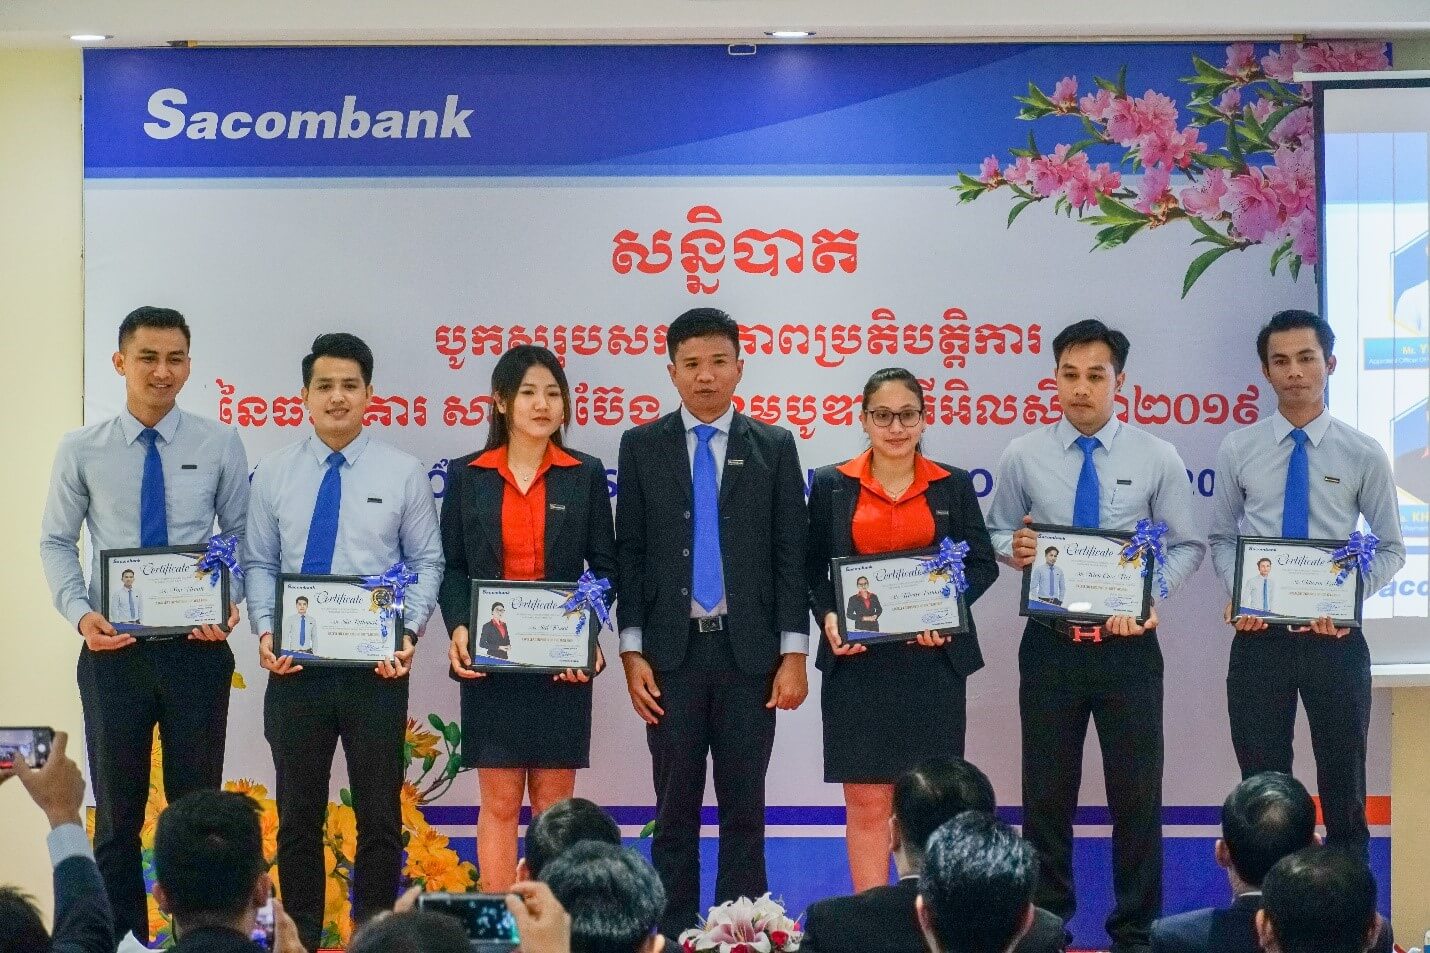 Board of Director of SC awarded the certificates for the loyal staffs who work with SC for a long timeនាំ